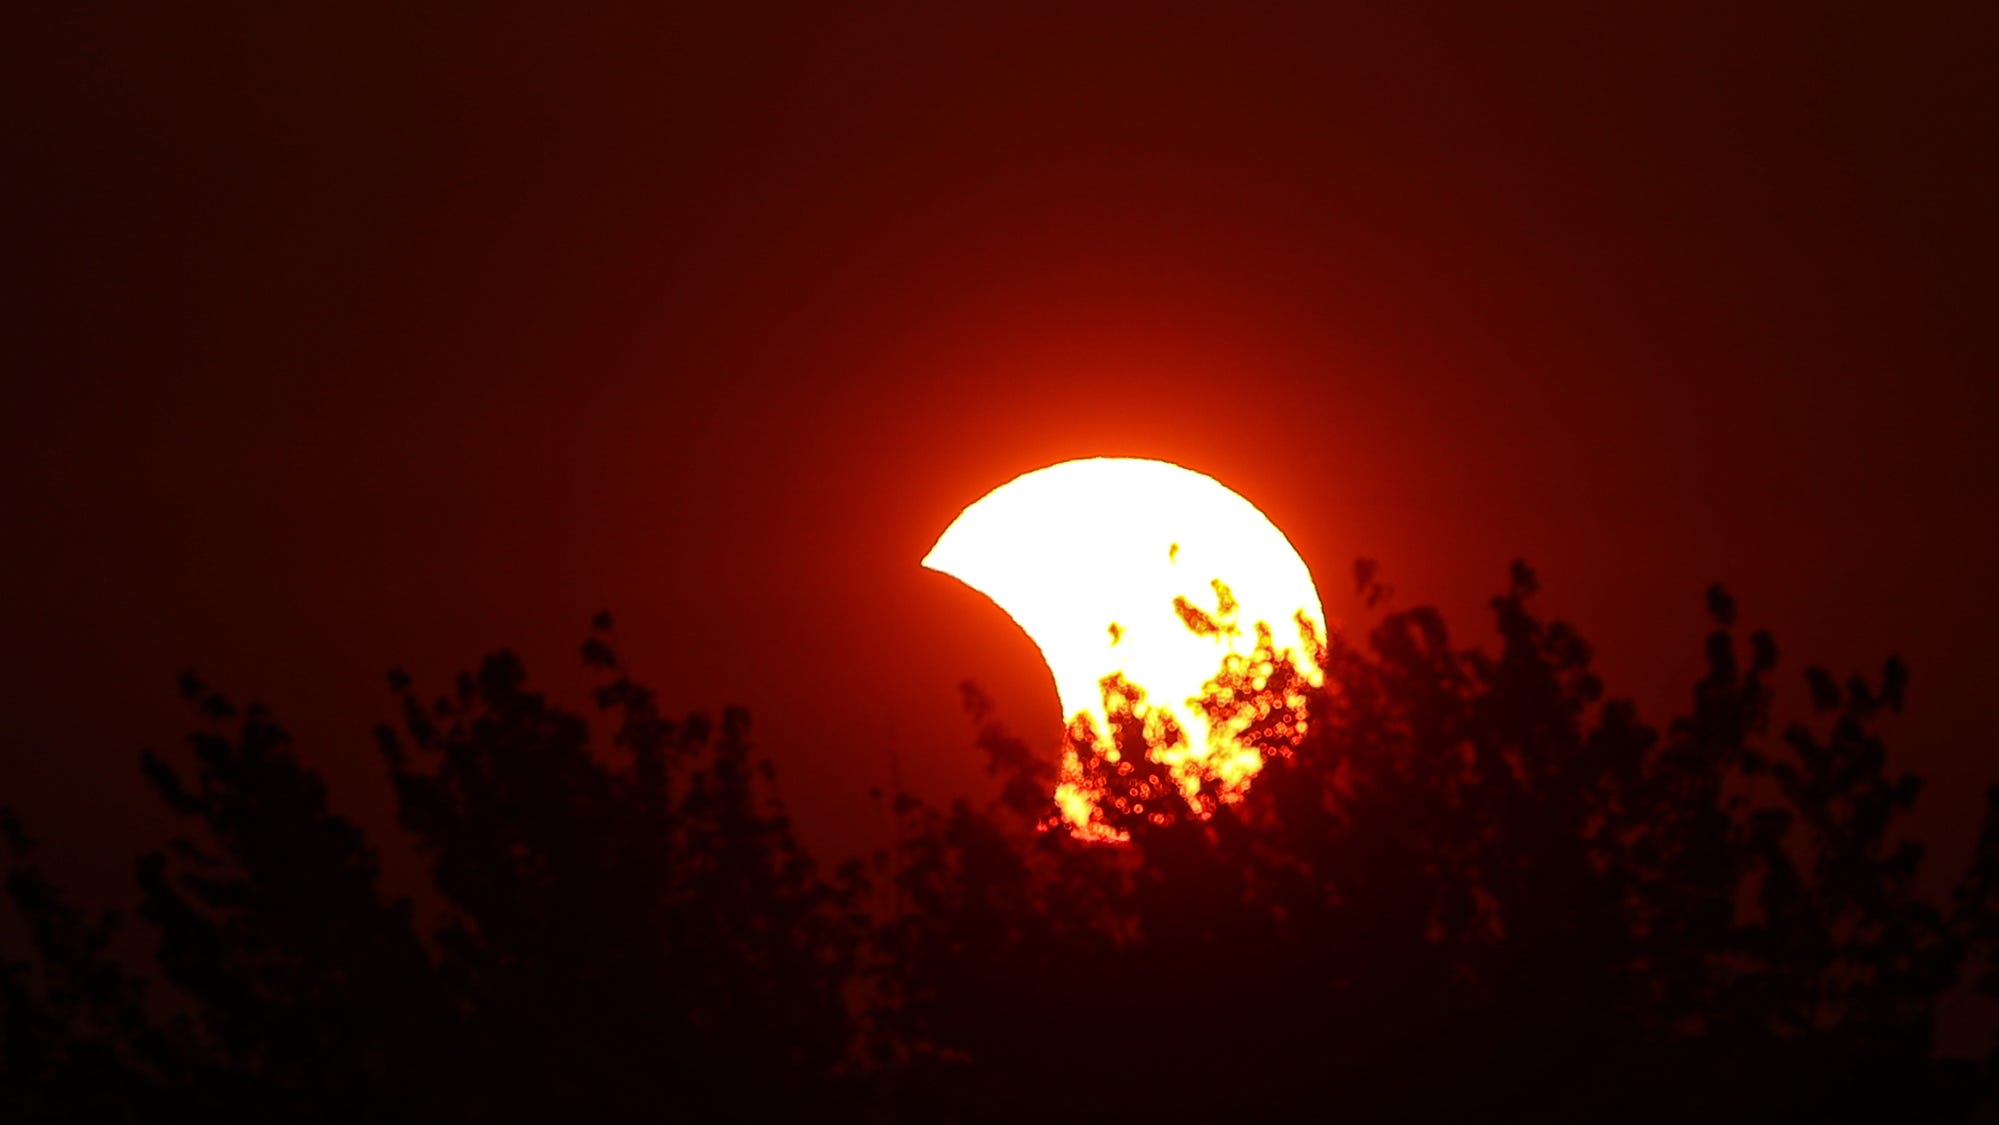 Video of solar eclipse from Fond du Lac, Wisconsin